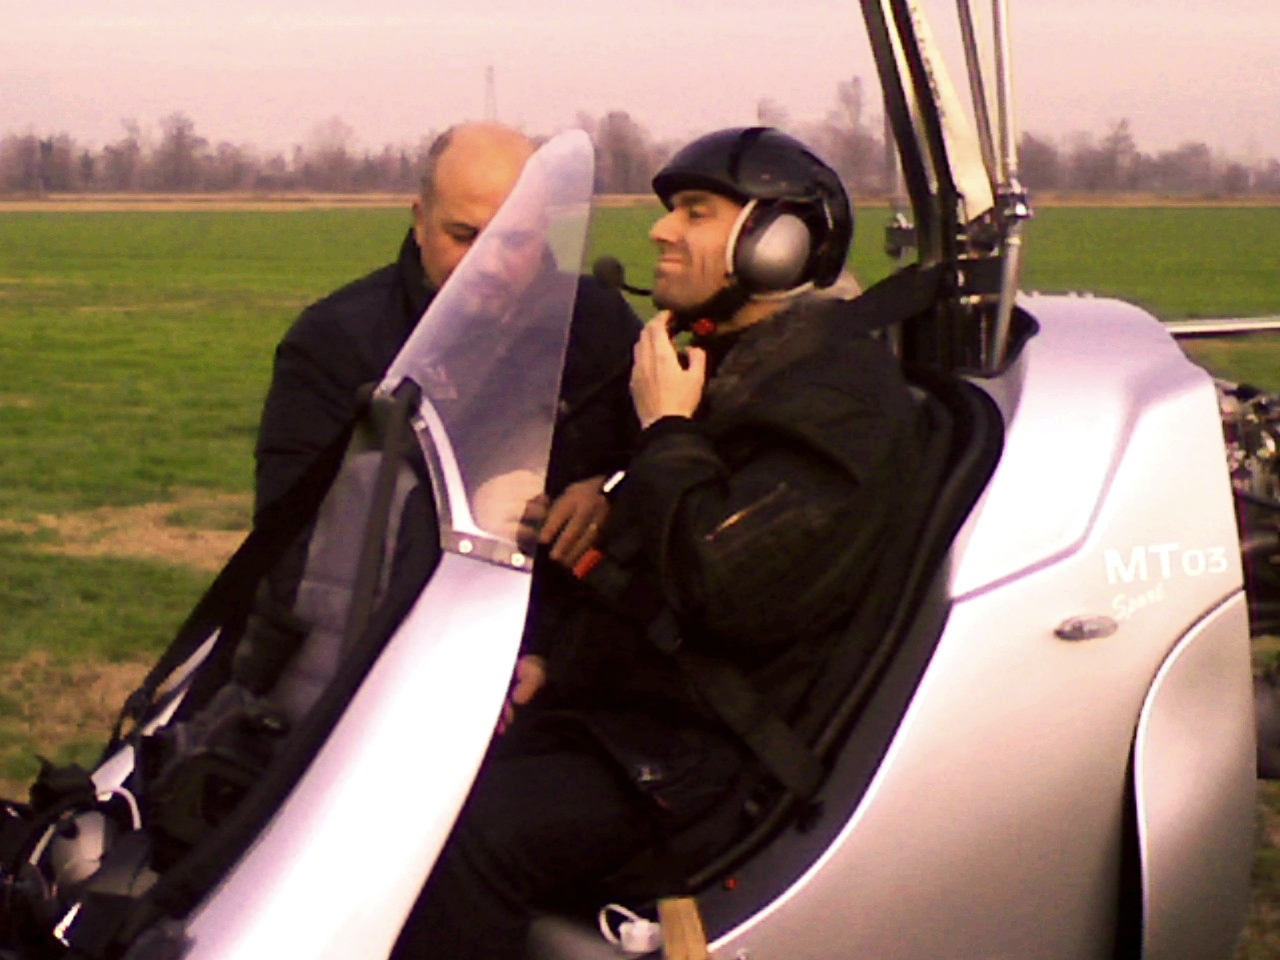 movie director Max Leonida, during an helicopter shooting for the feature film 